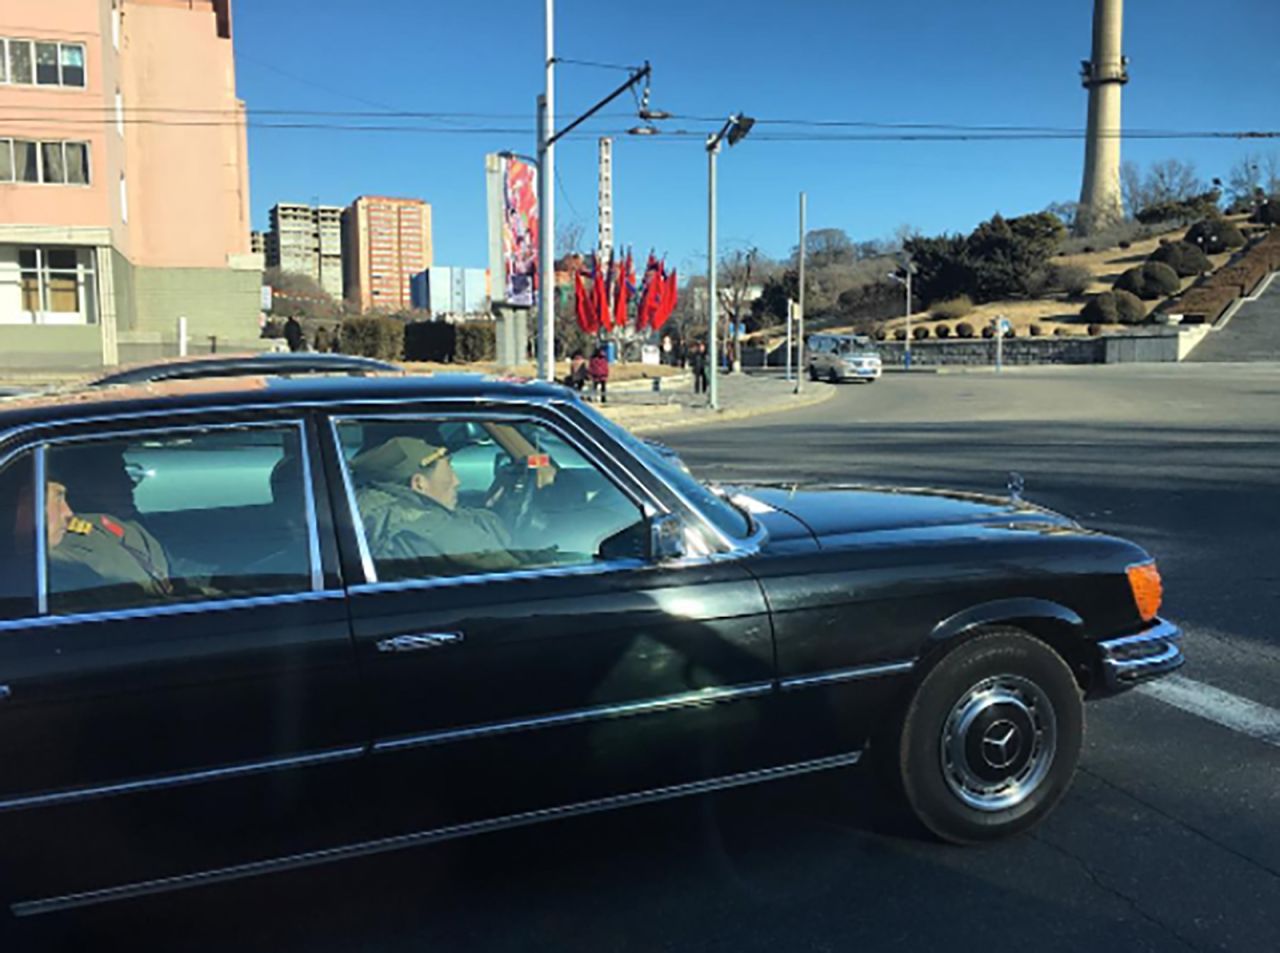 North Korean soldiers ride on February 17, in a black Mercedes-Benz on the streets of Pyongyang.